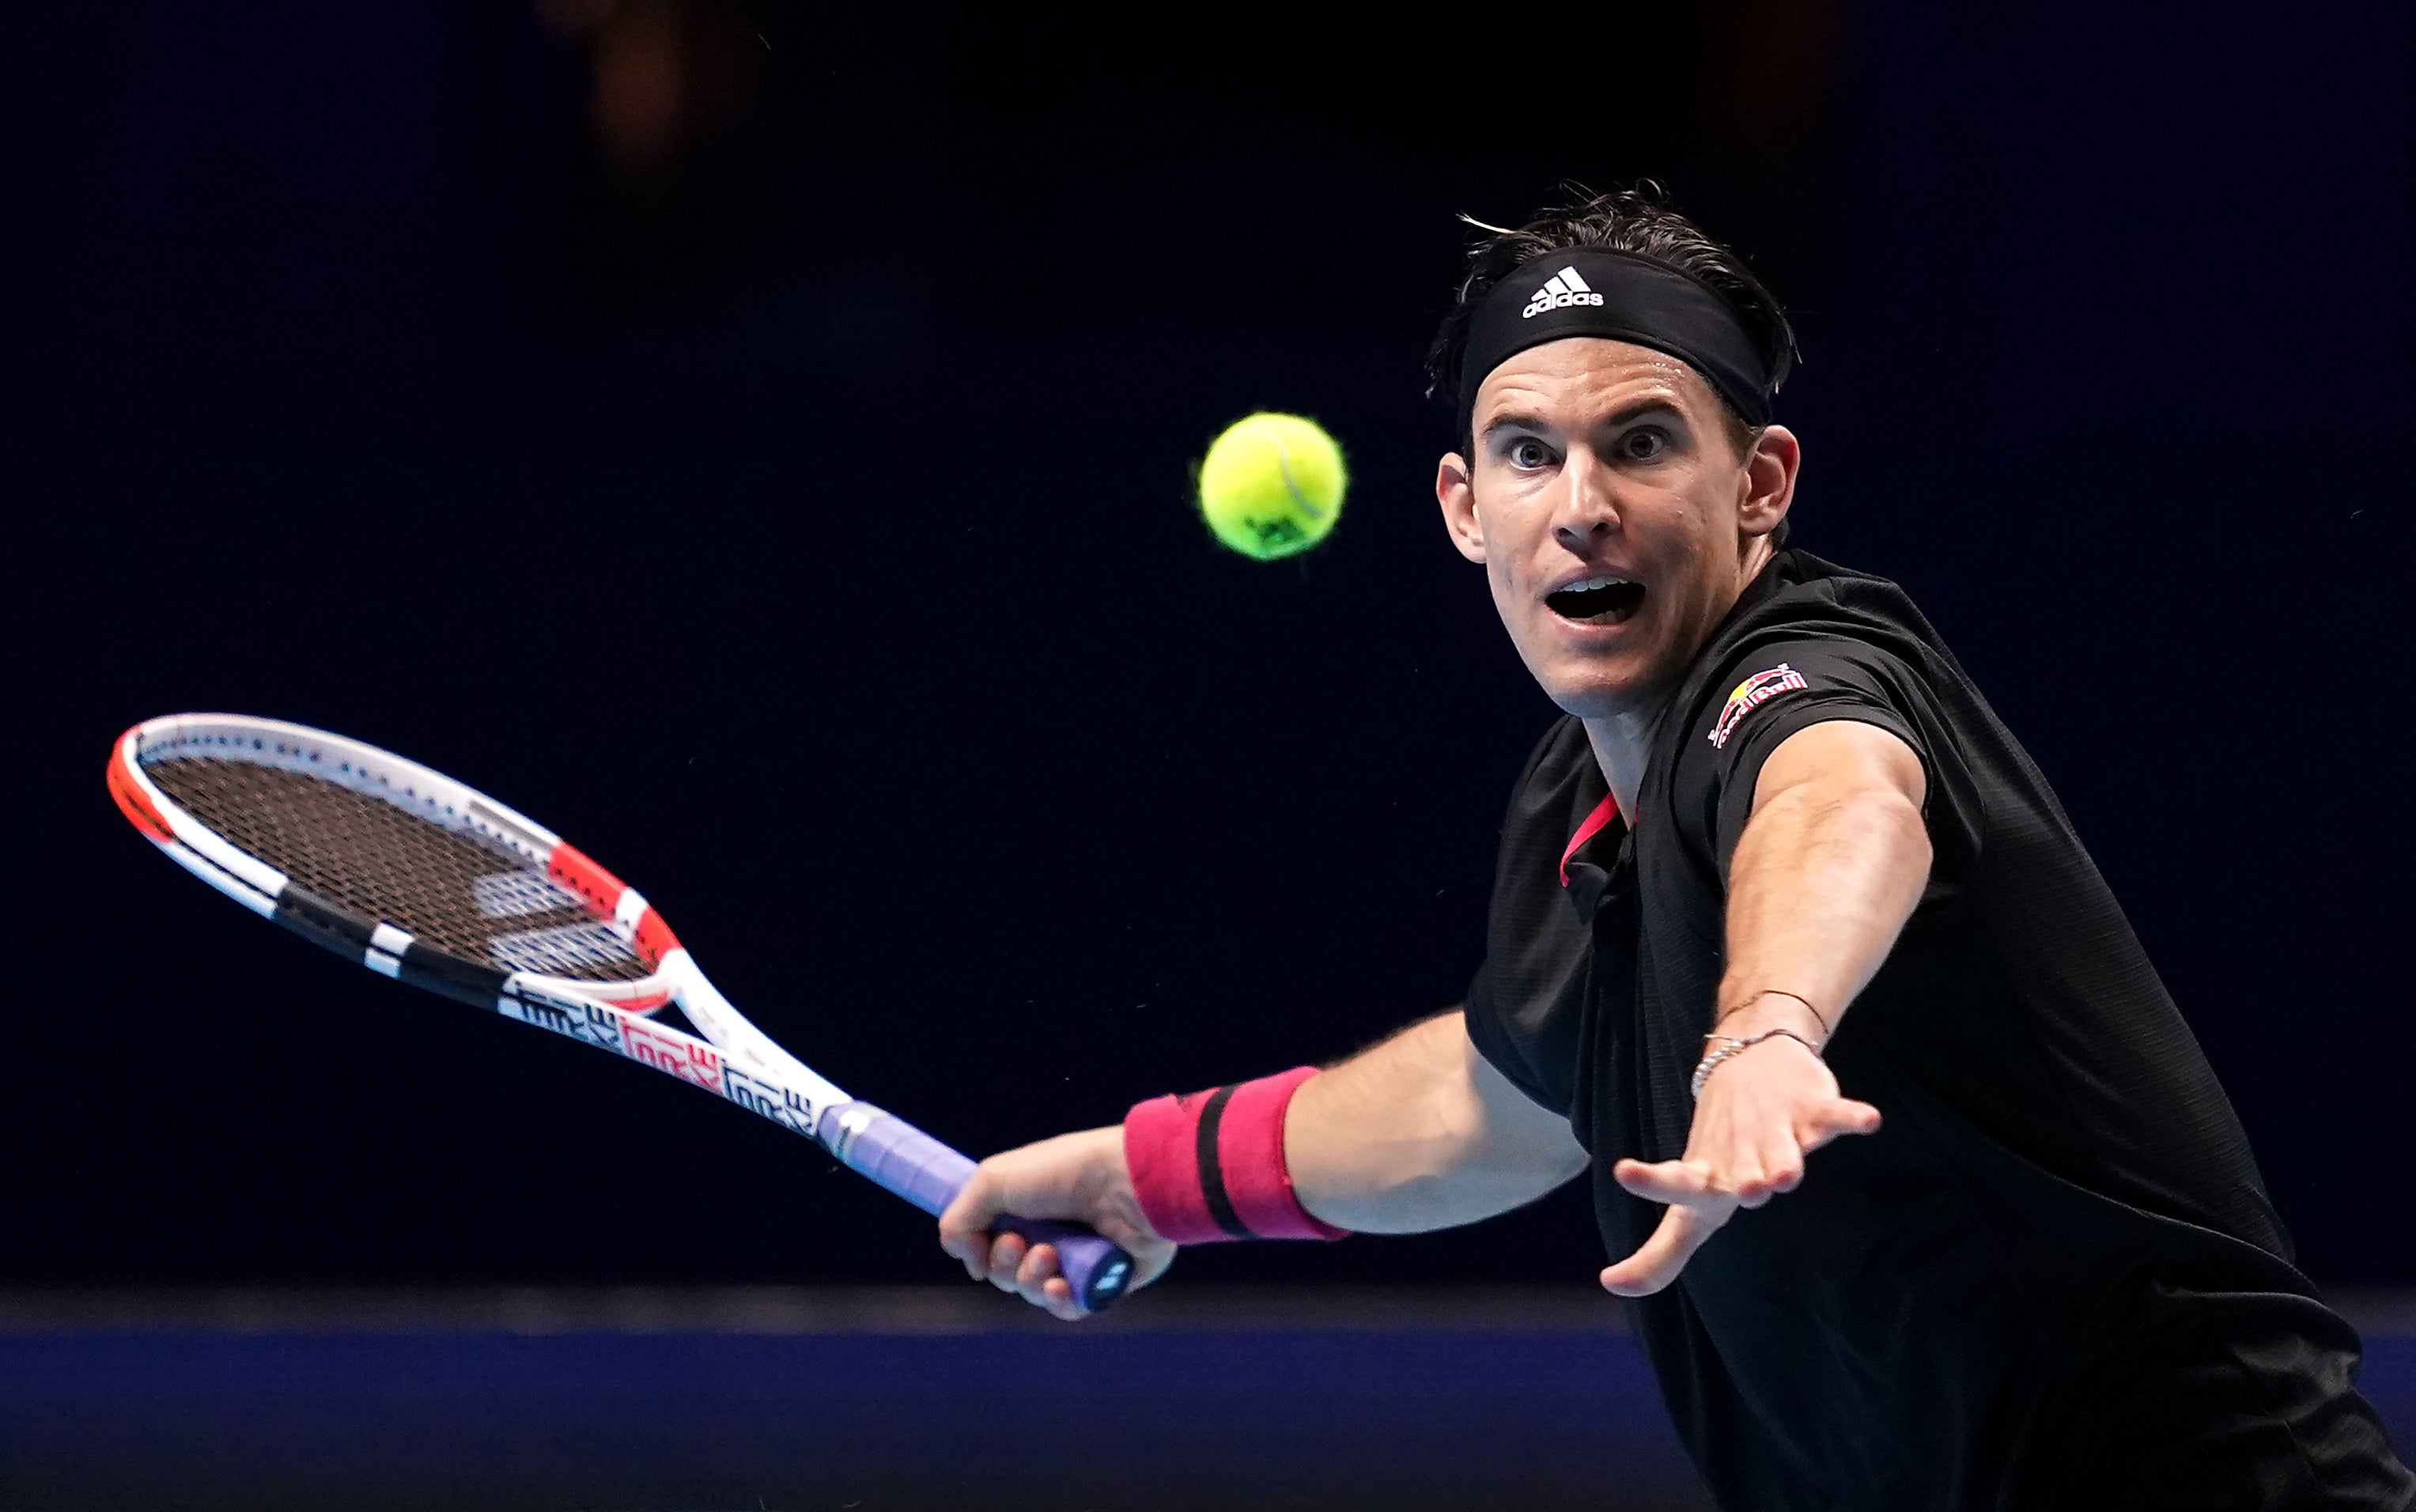 Dominic Thiem has delayed his return from a wrist injury